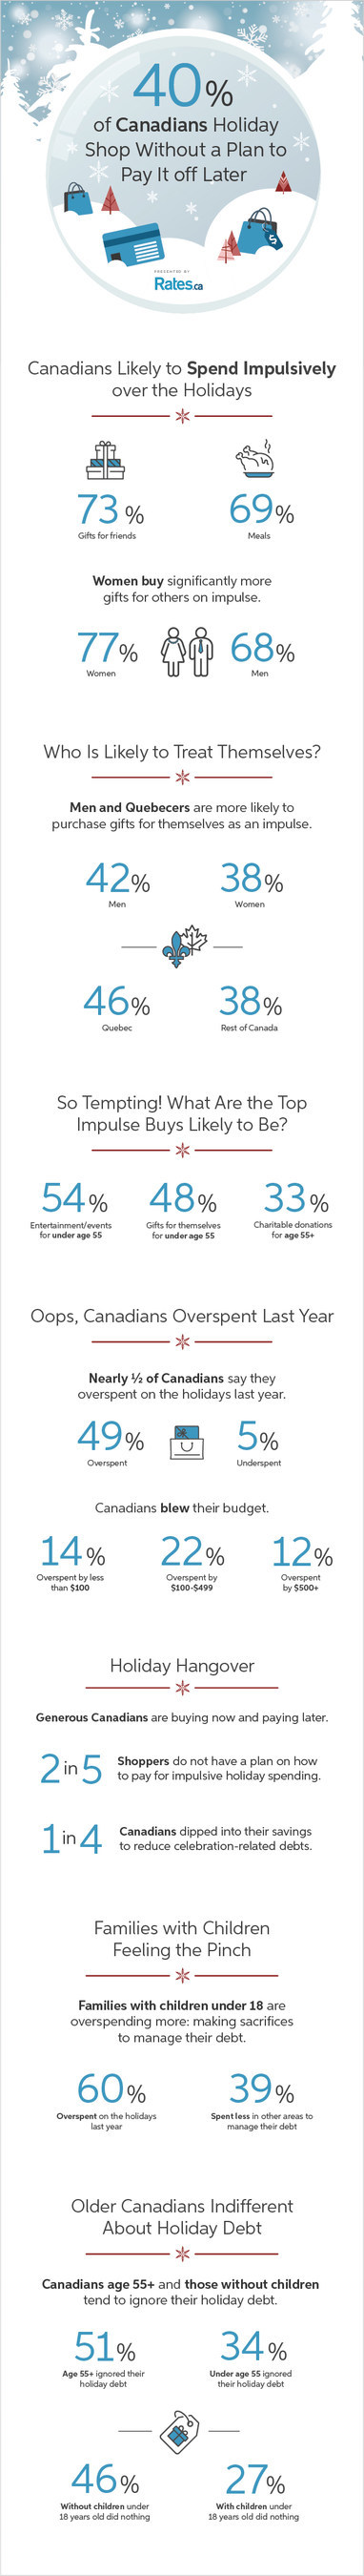 Close to Half of Canadians Holiday Shop without a Plan on How to Pay Off Debt Later: National Survey (CNW Group/Rates.ca)